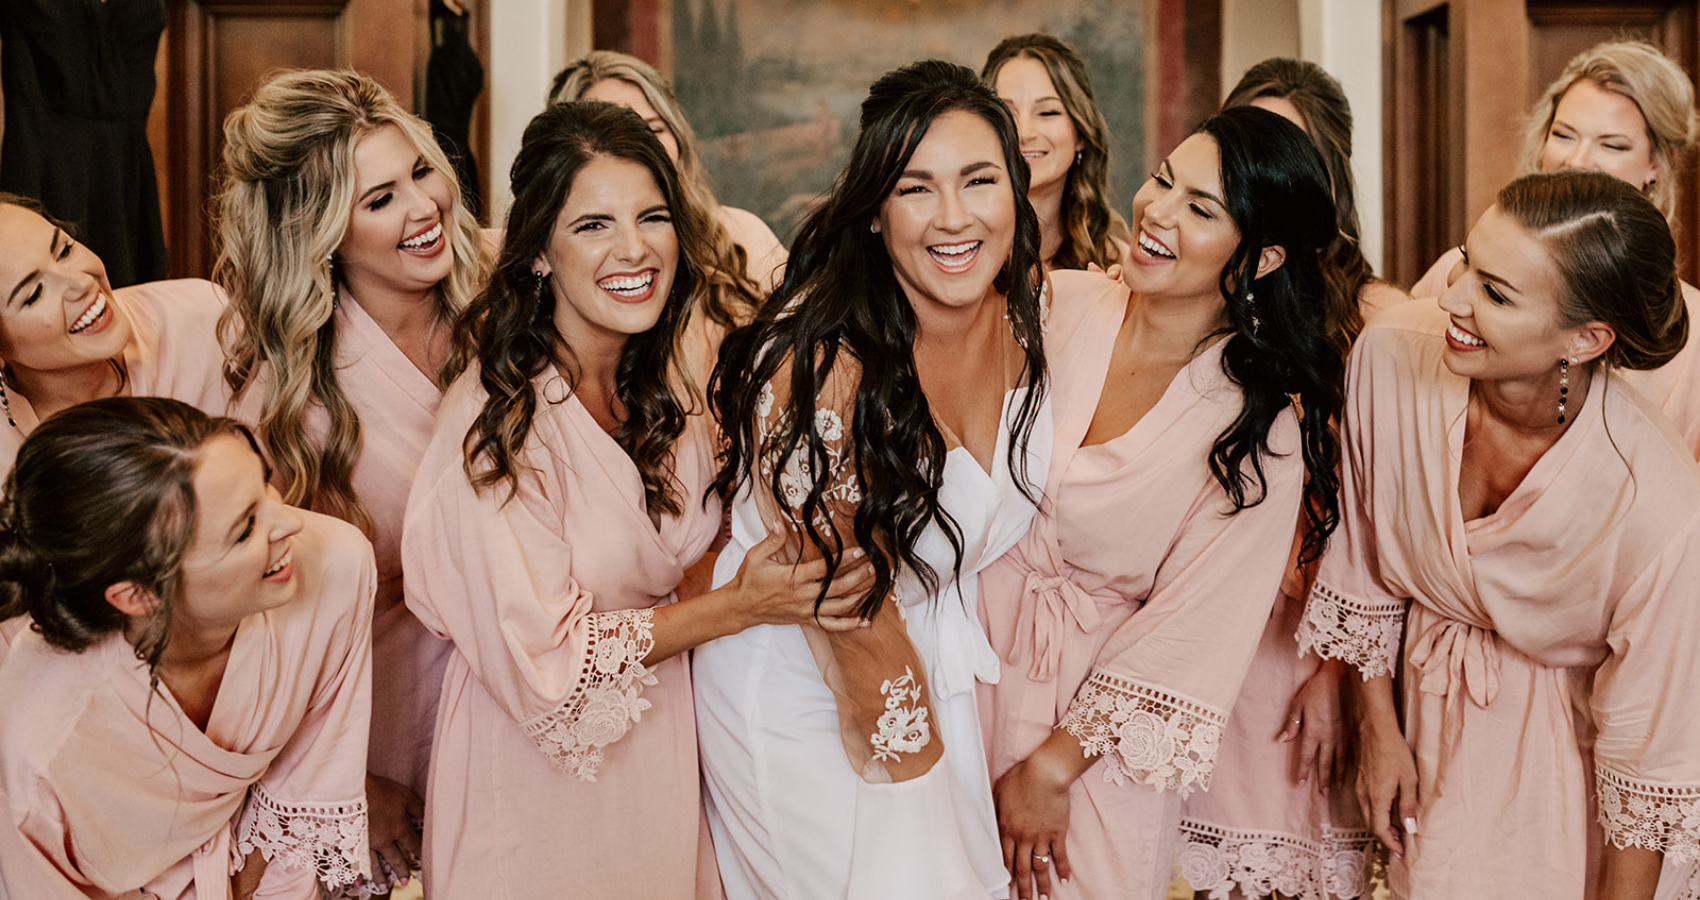 Photo Of A Bride With Her Bridesmaids Wearing Matching Pink Robes For The Blog Header Image For The Best Bachelorette Party Ideas Blog From Maggie Sottero Designs